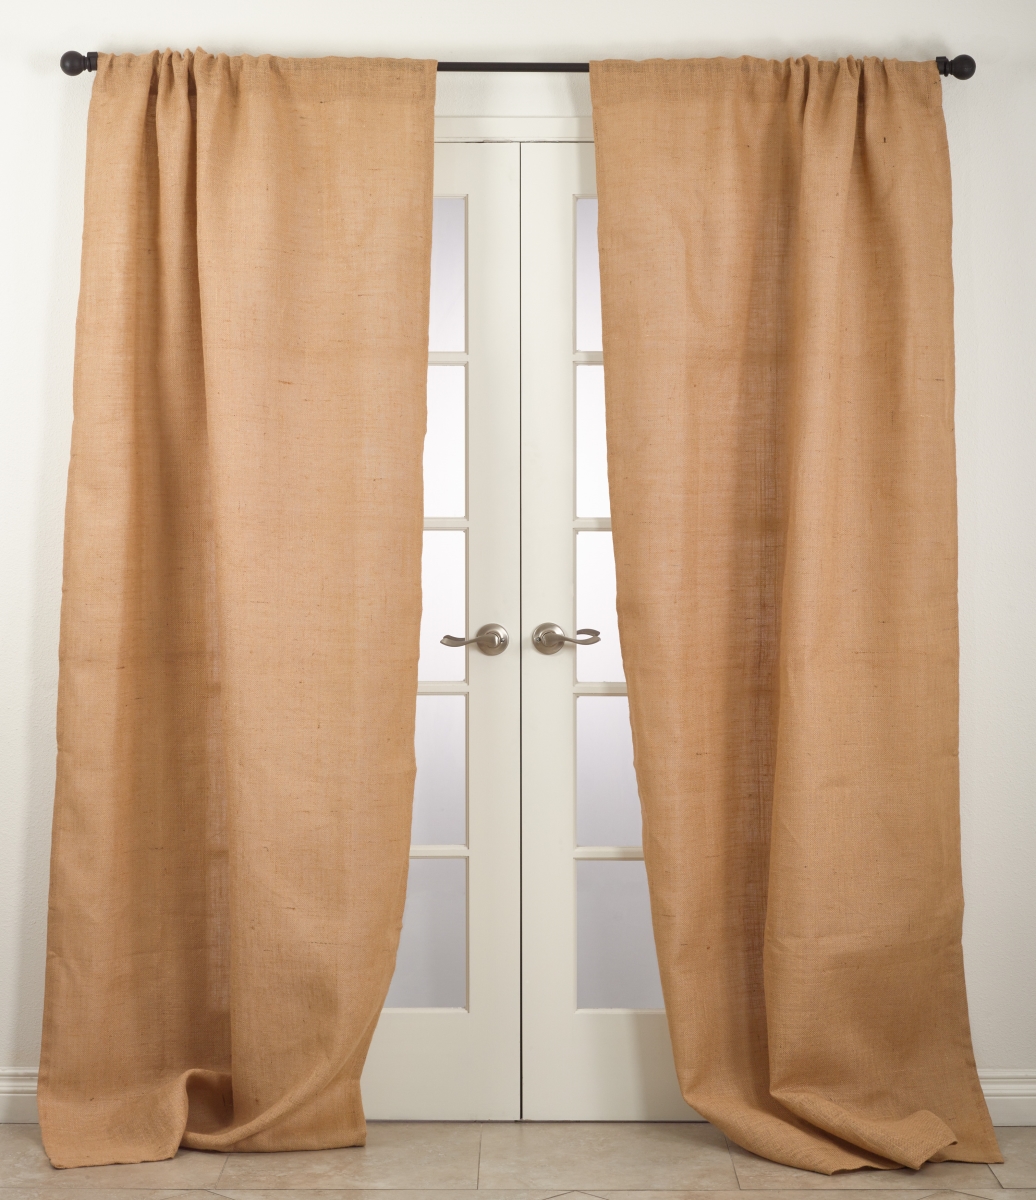 0811.n4296 Open Weave Lined Burlap Curtain Panel - Natural